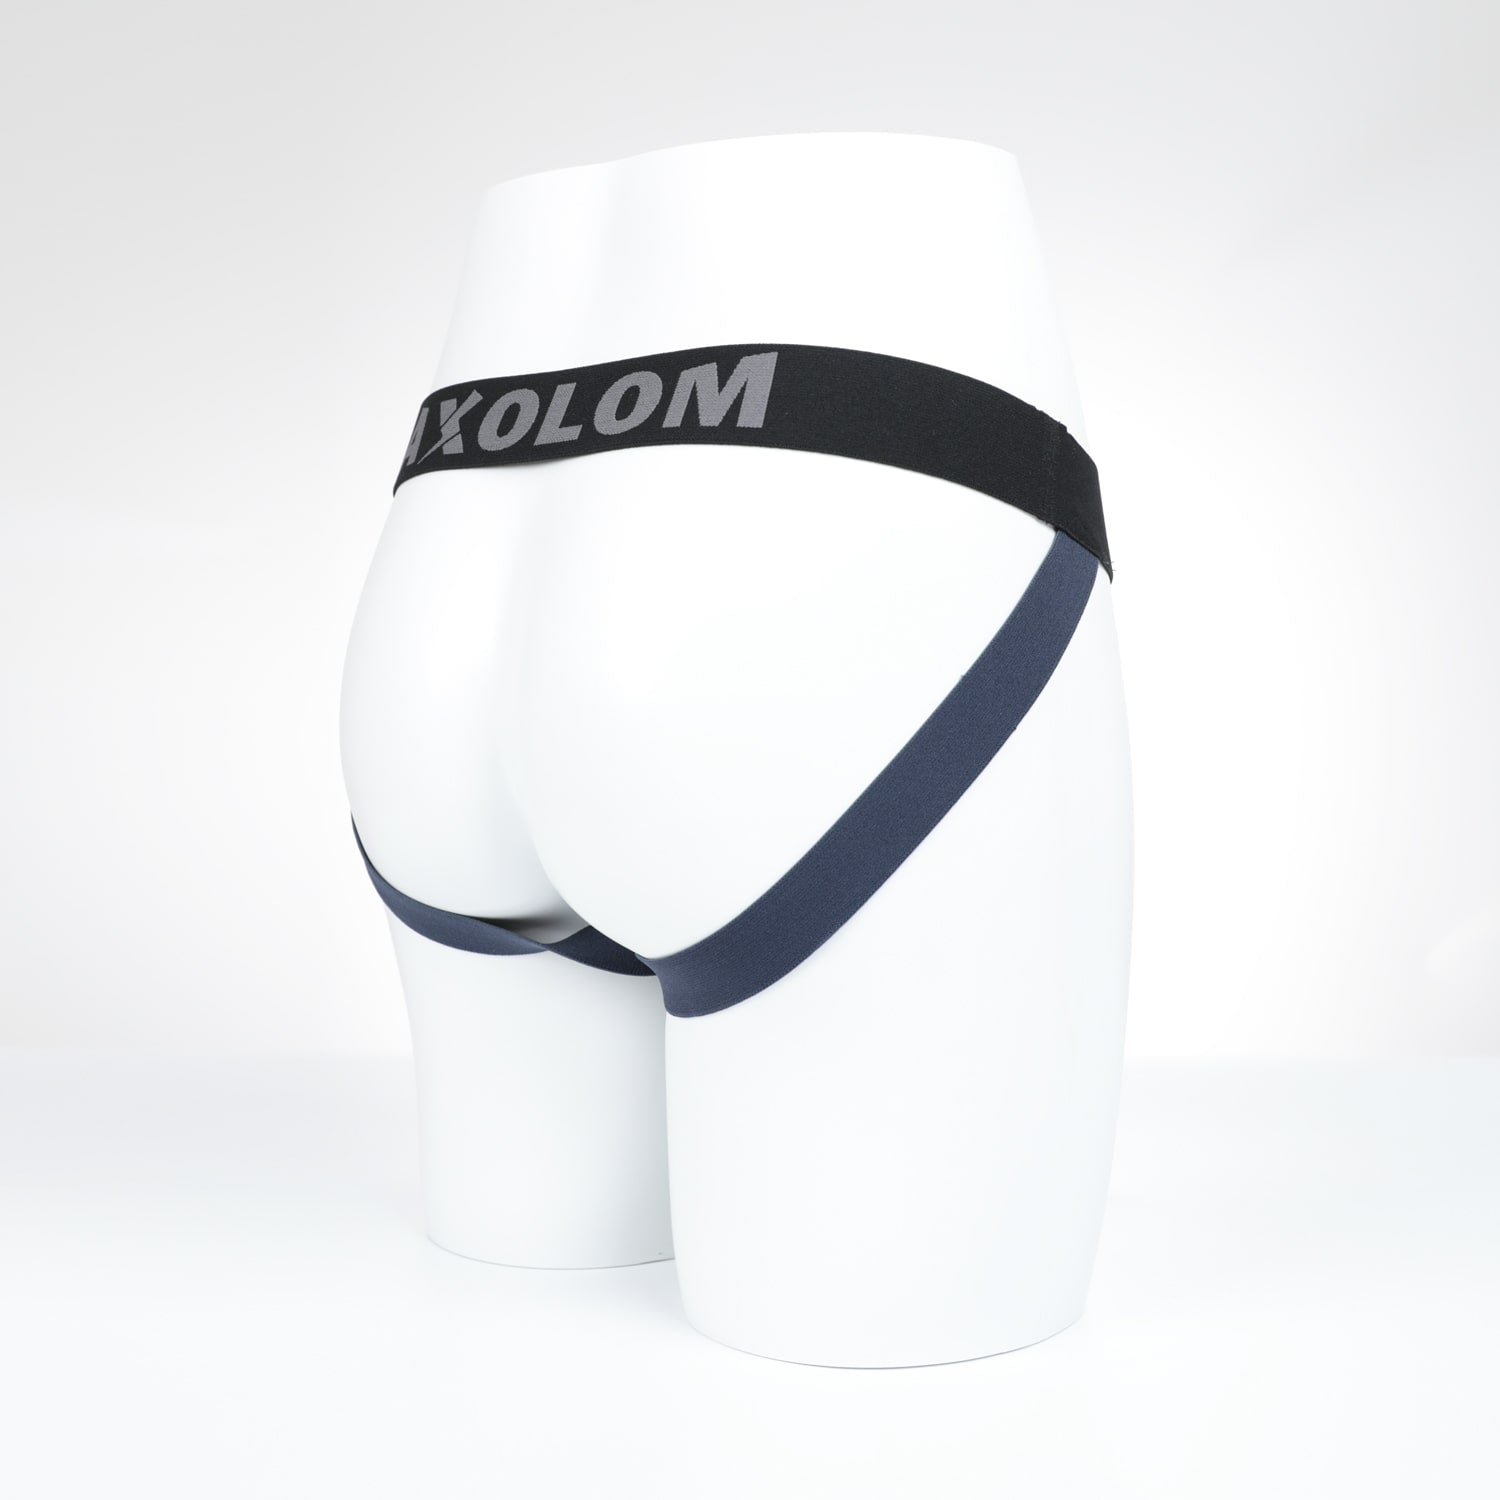 Trans FTM Boxer Packing Briefs O-Ring Strap-On Packer Harness Underwear L-XL